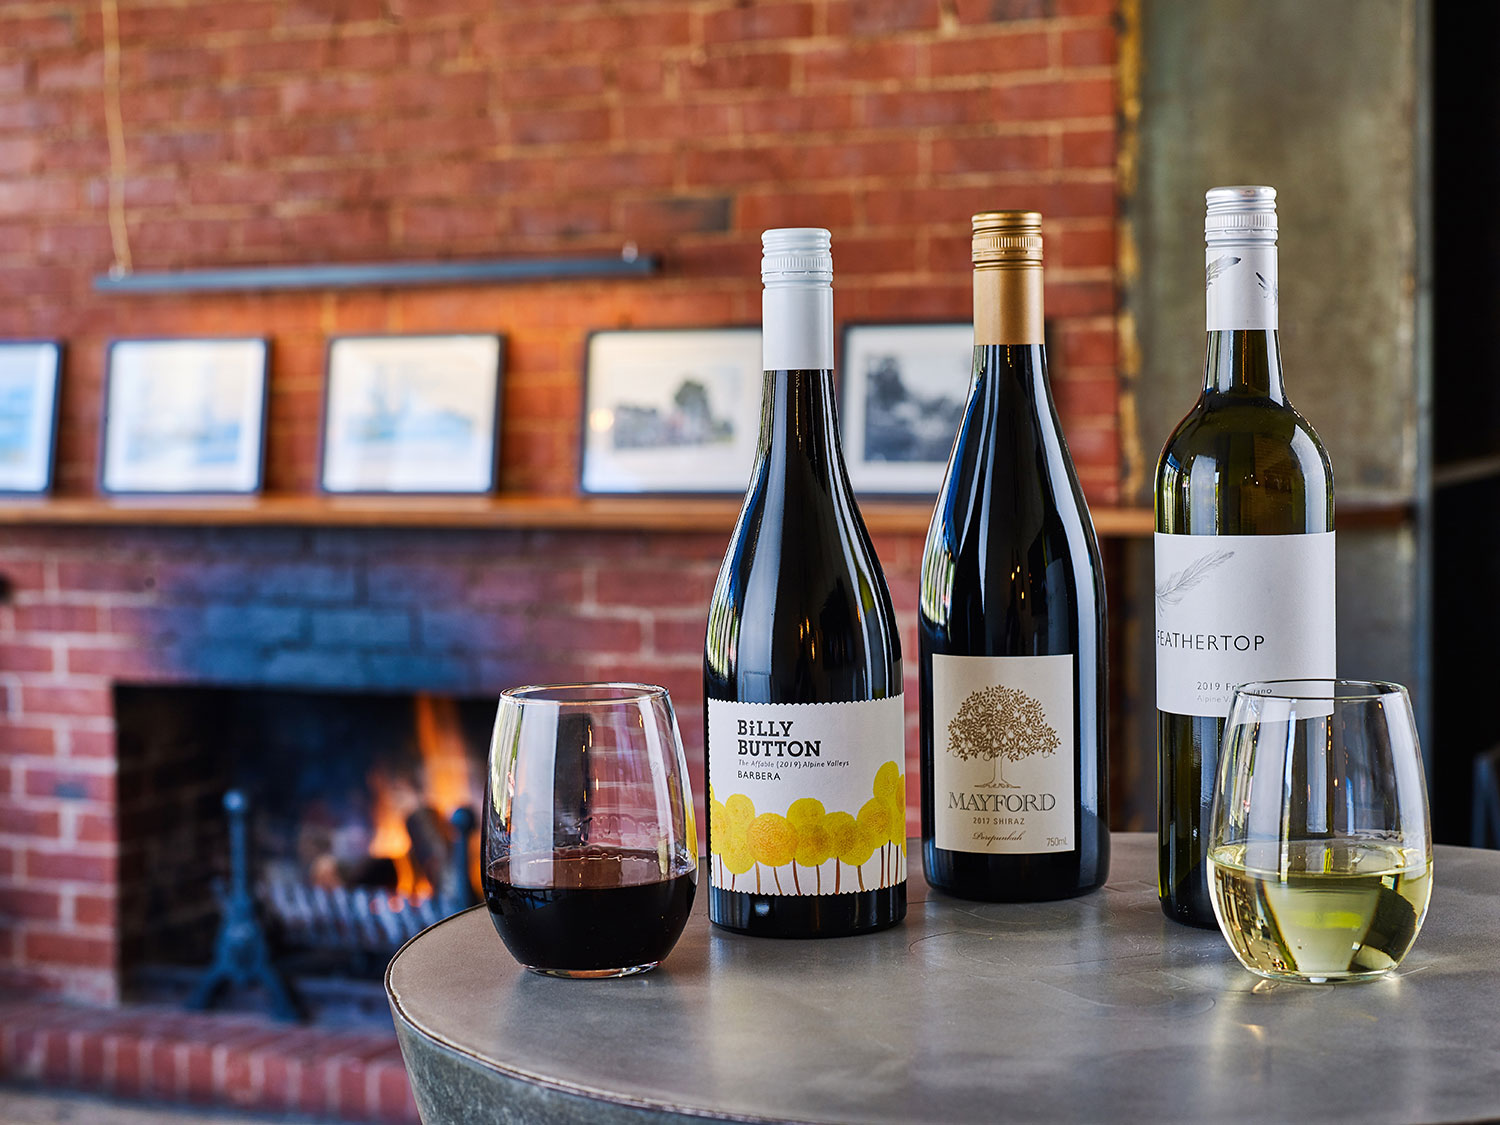 The Porepunkah Pub is proud to be showcasing wines only from their Porepunkah postcode 3740